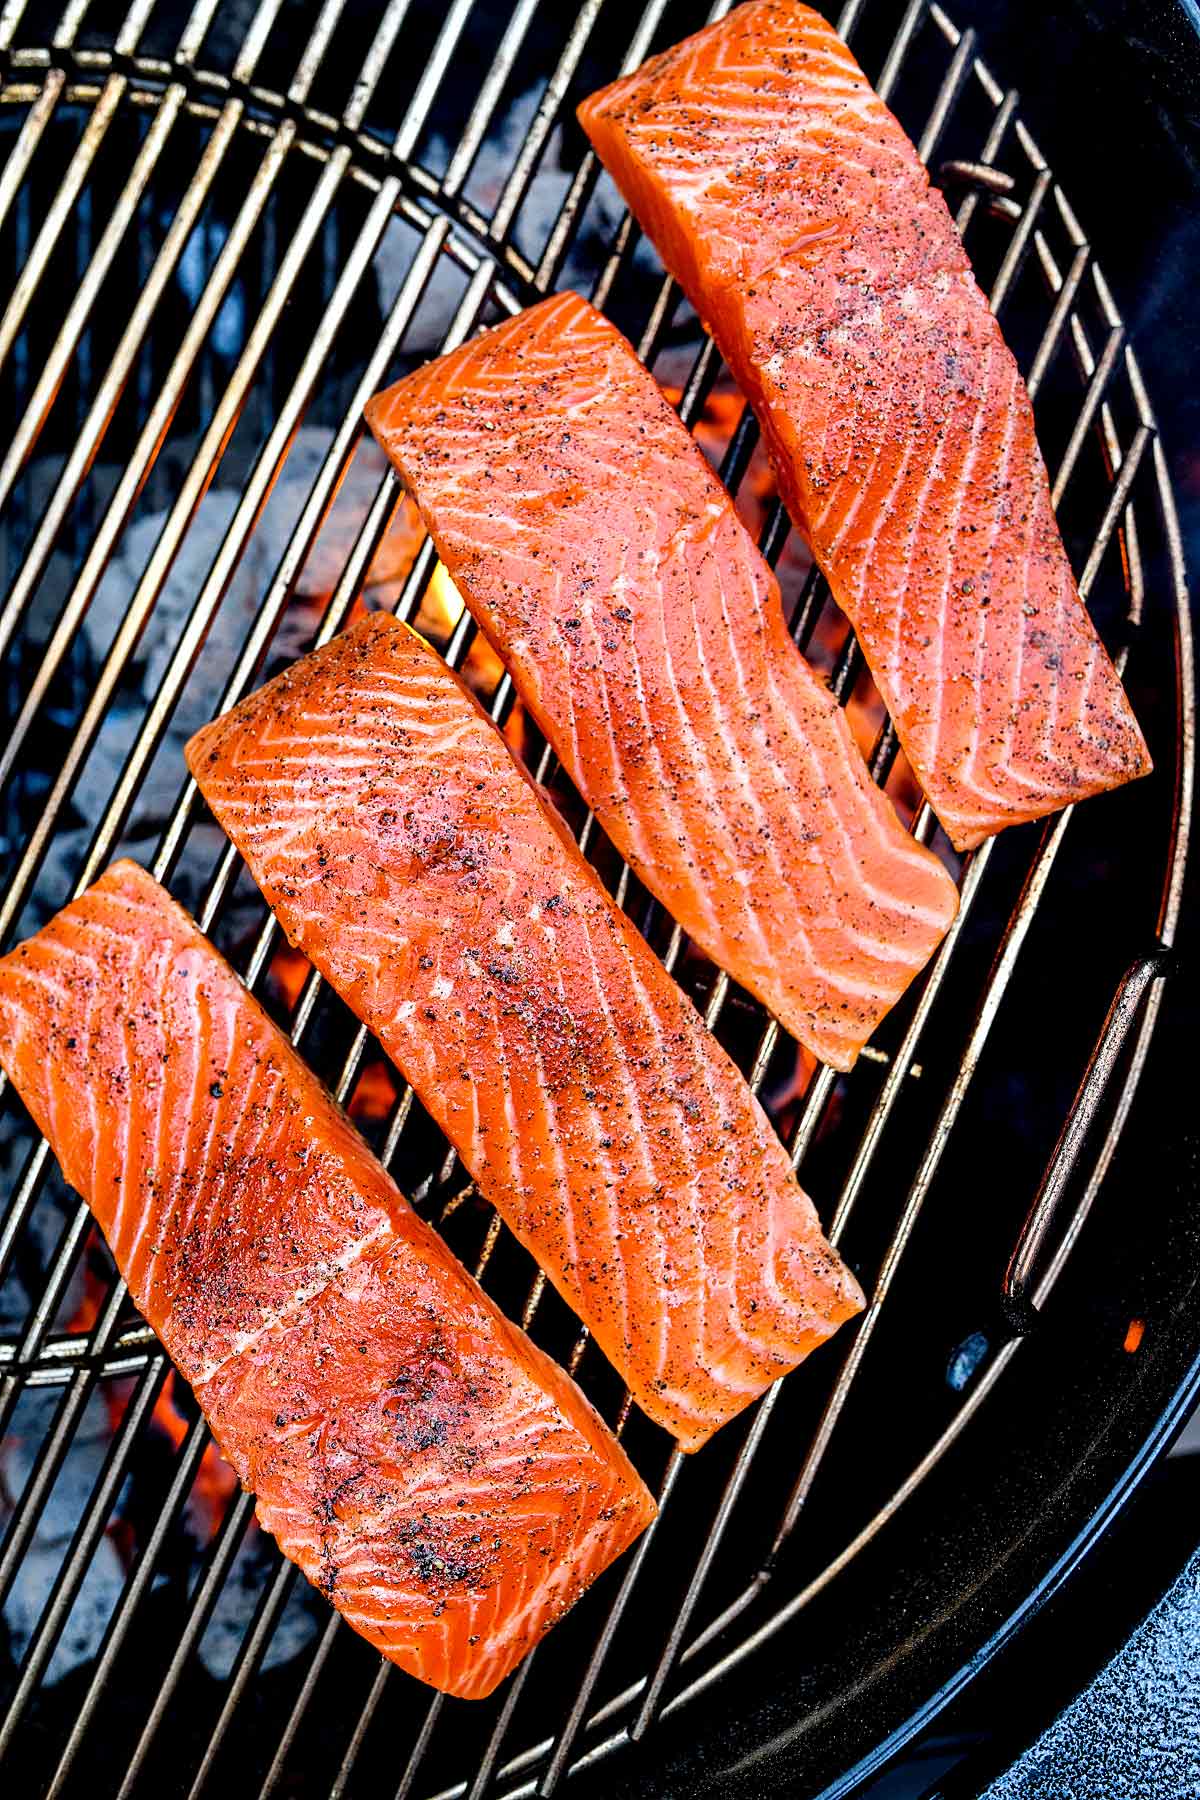 Grilling Salmon with an Amazing Taste